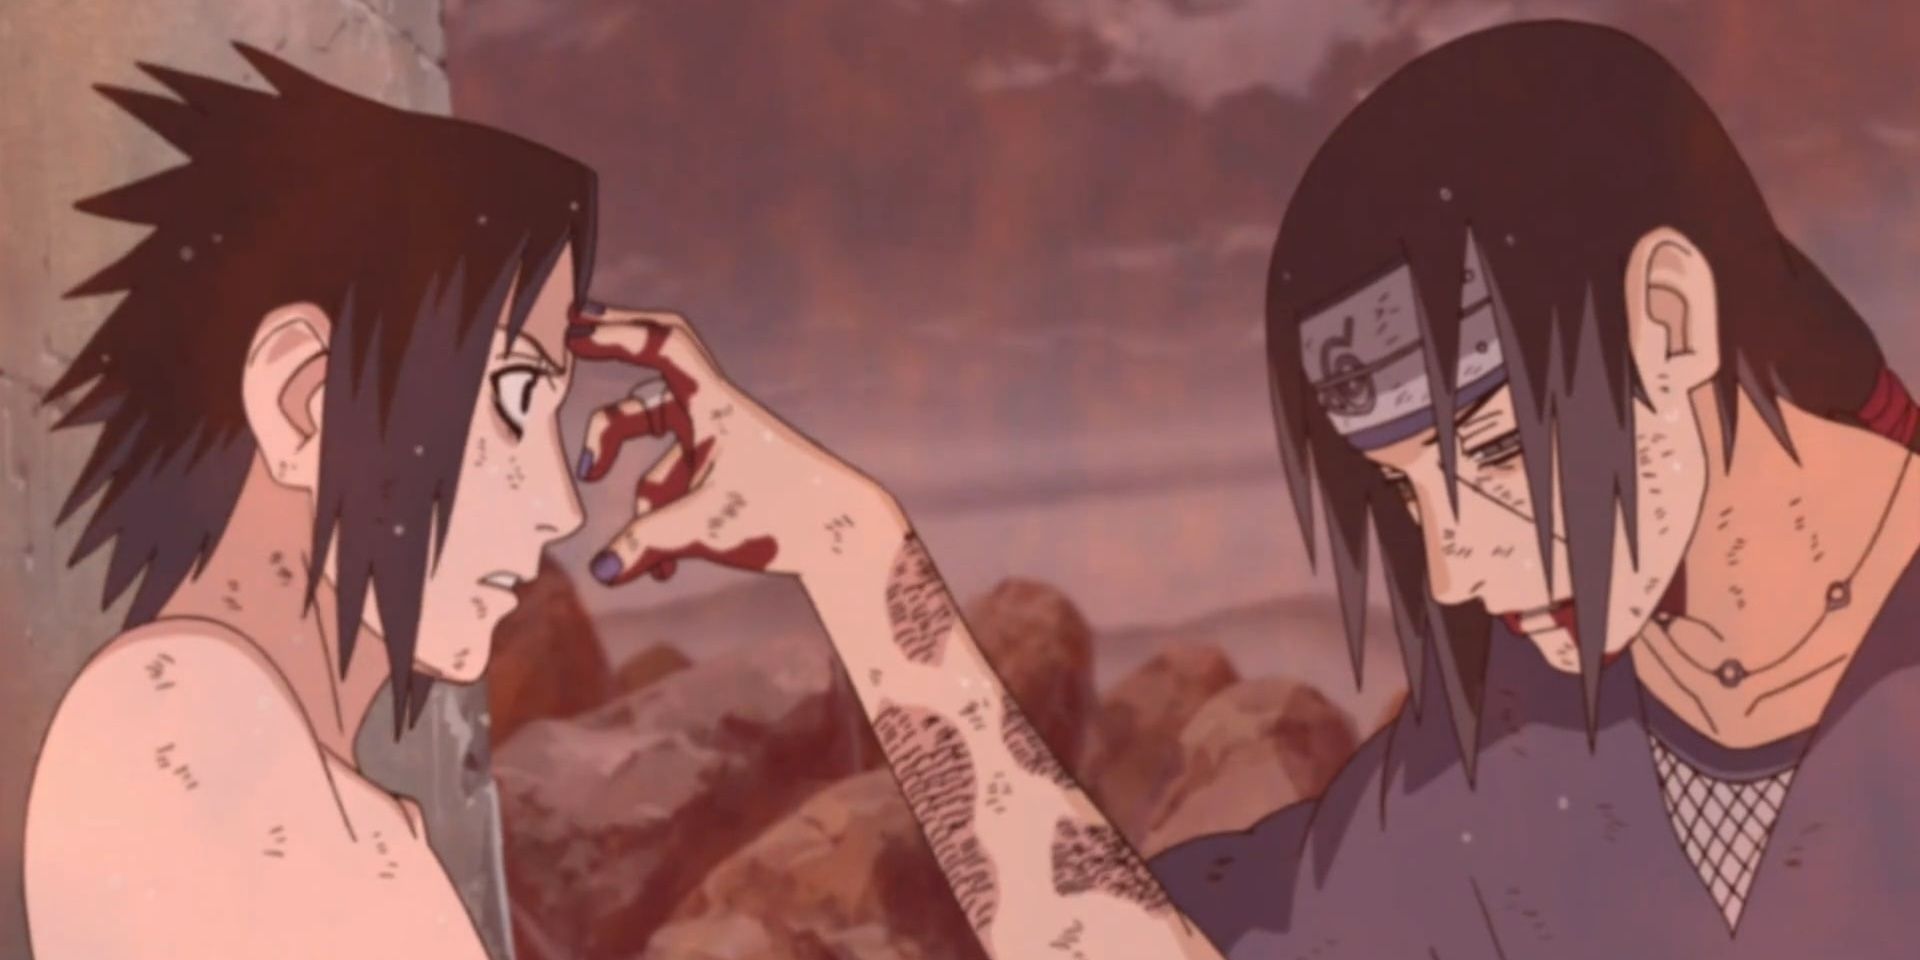 Itachi touching Sasuke's forehead with bloody fingers before his death